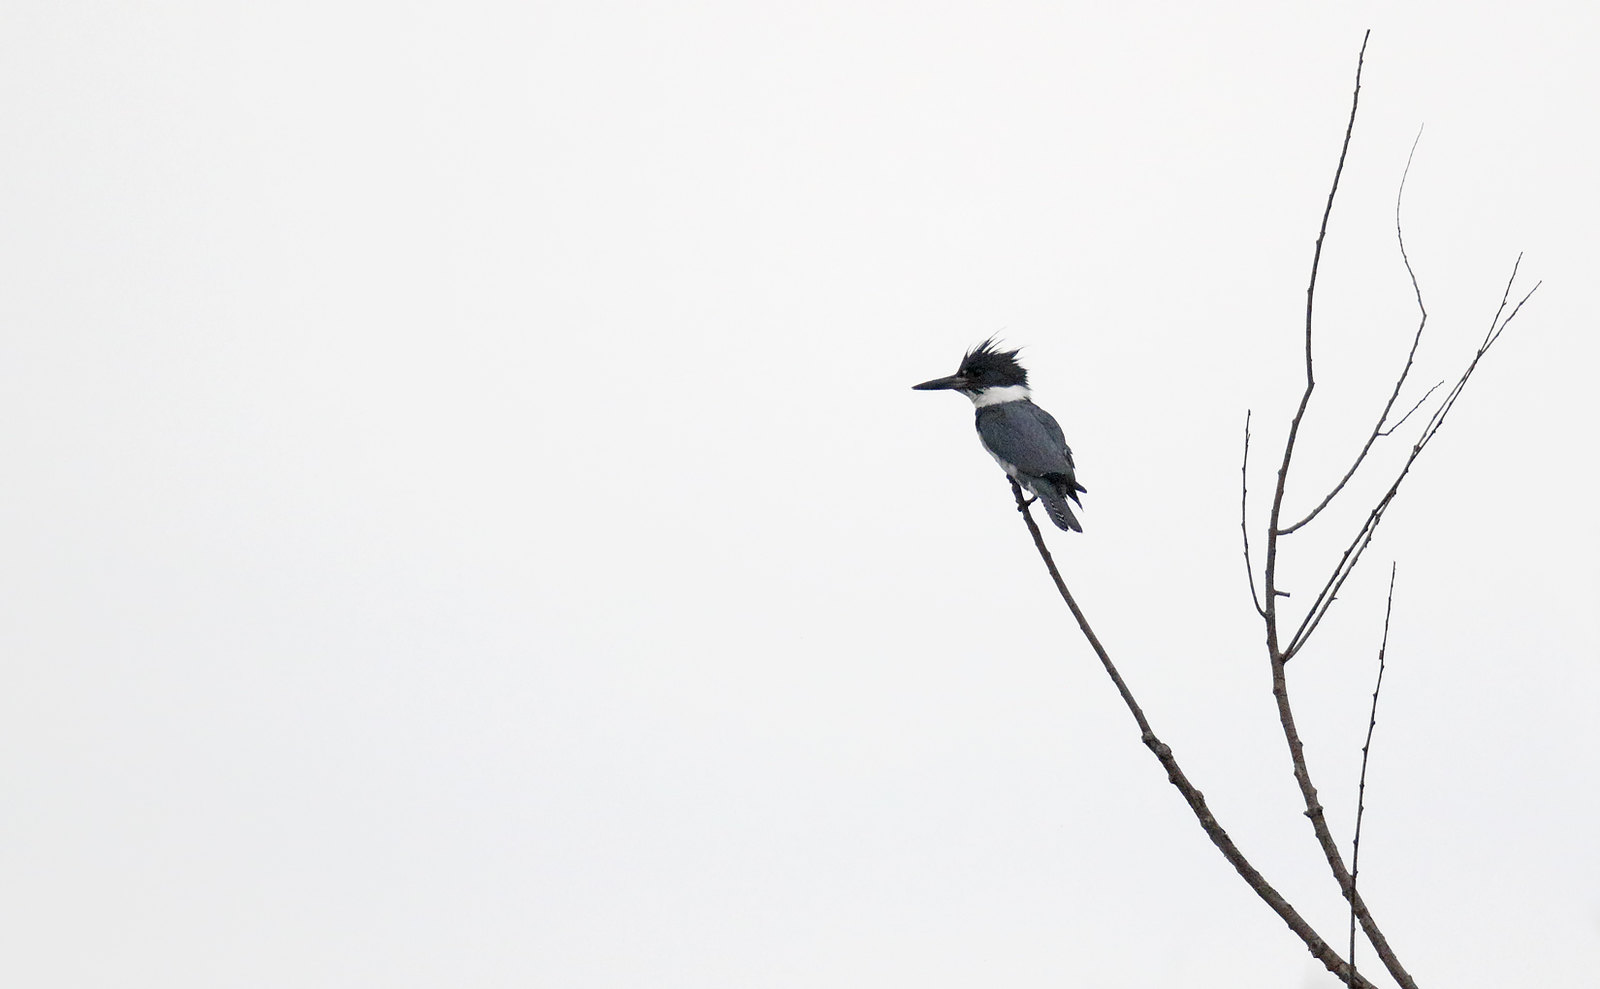 Distant Belted Kingfisher